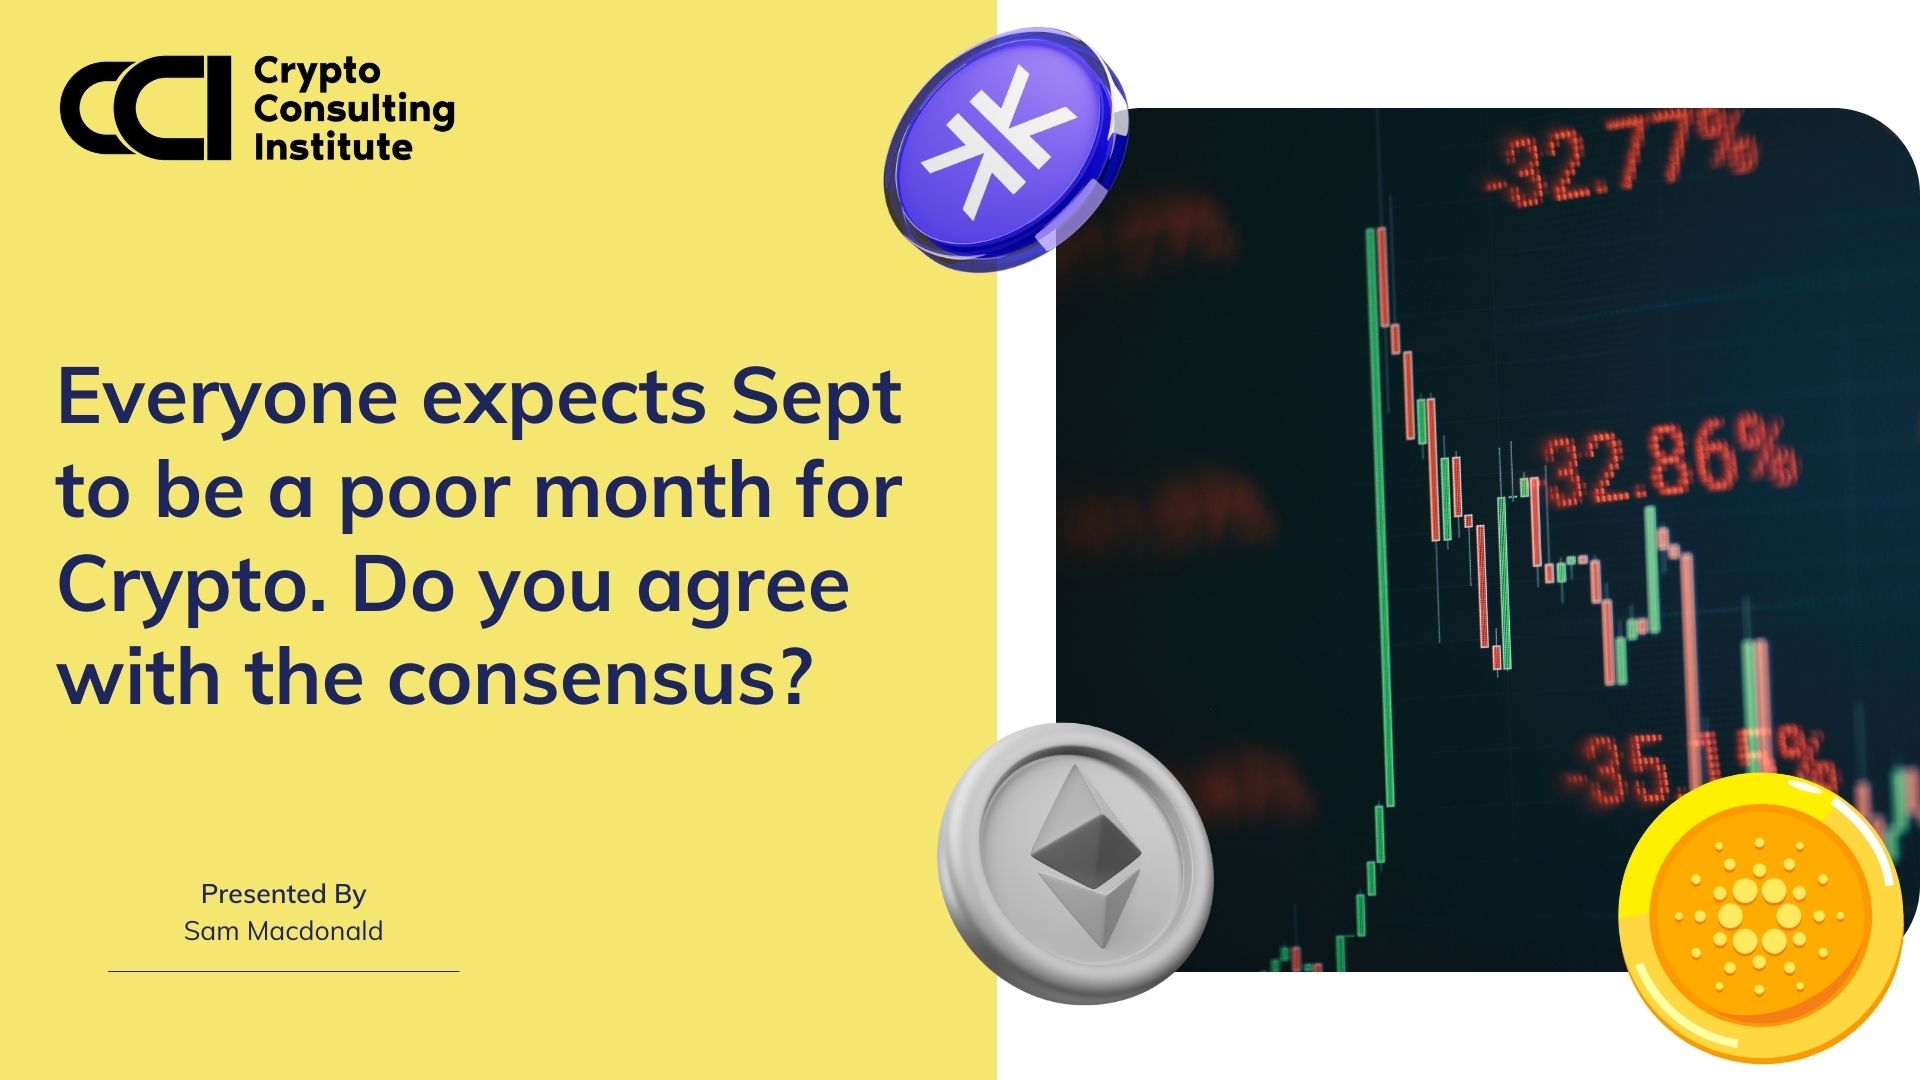 Everyone expects Sept to be a poor month for Crypto. Do you agree with the consensus?